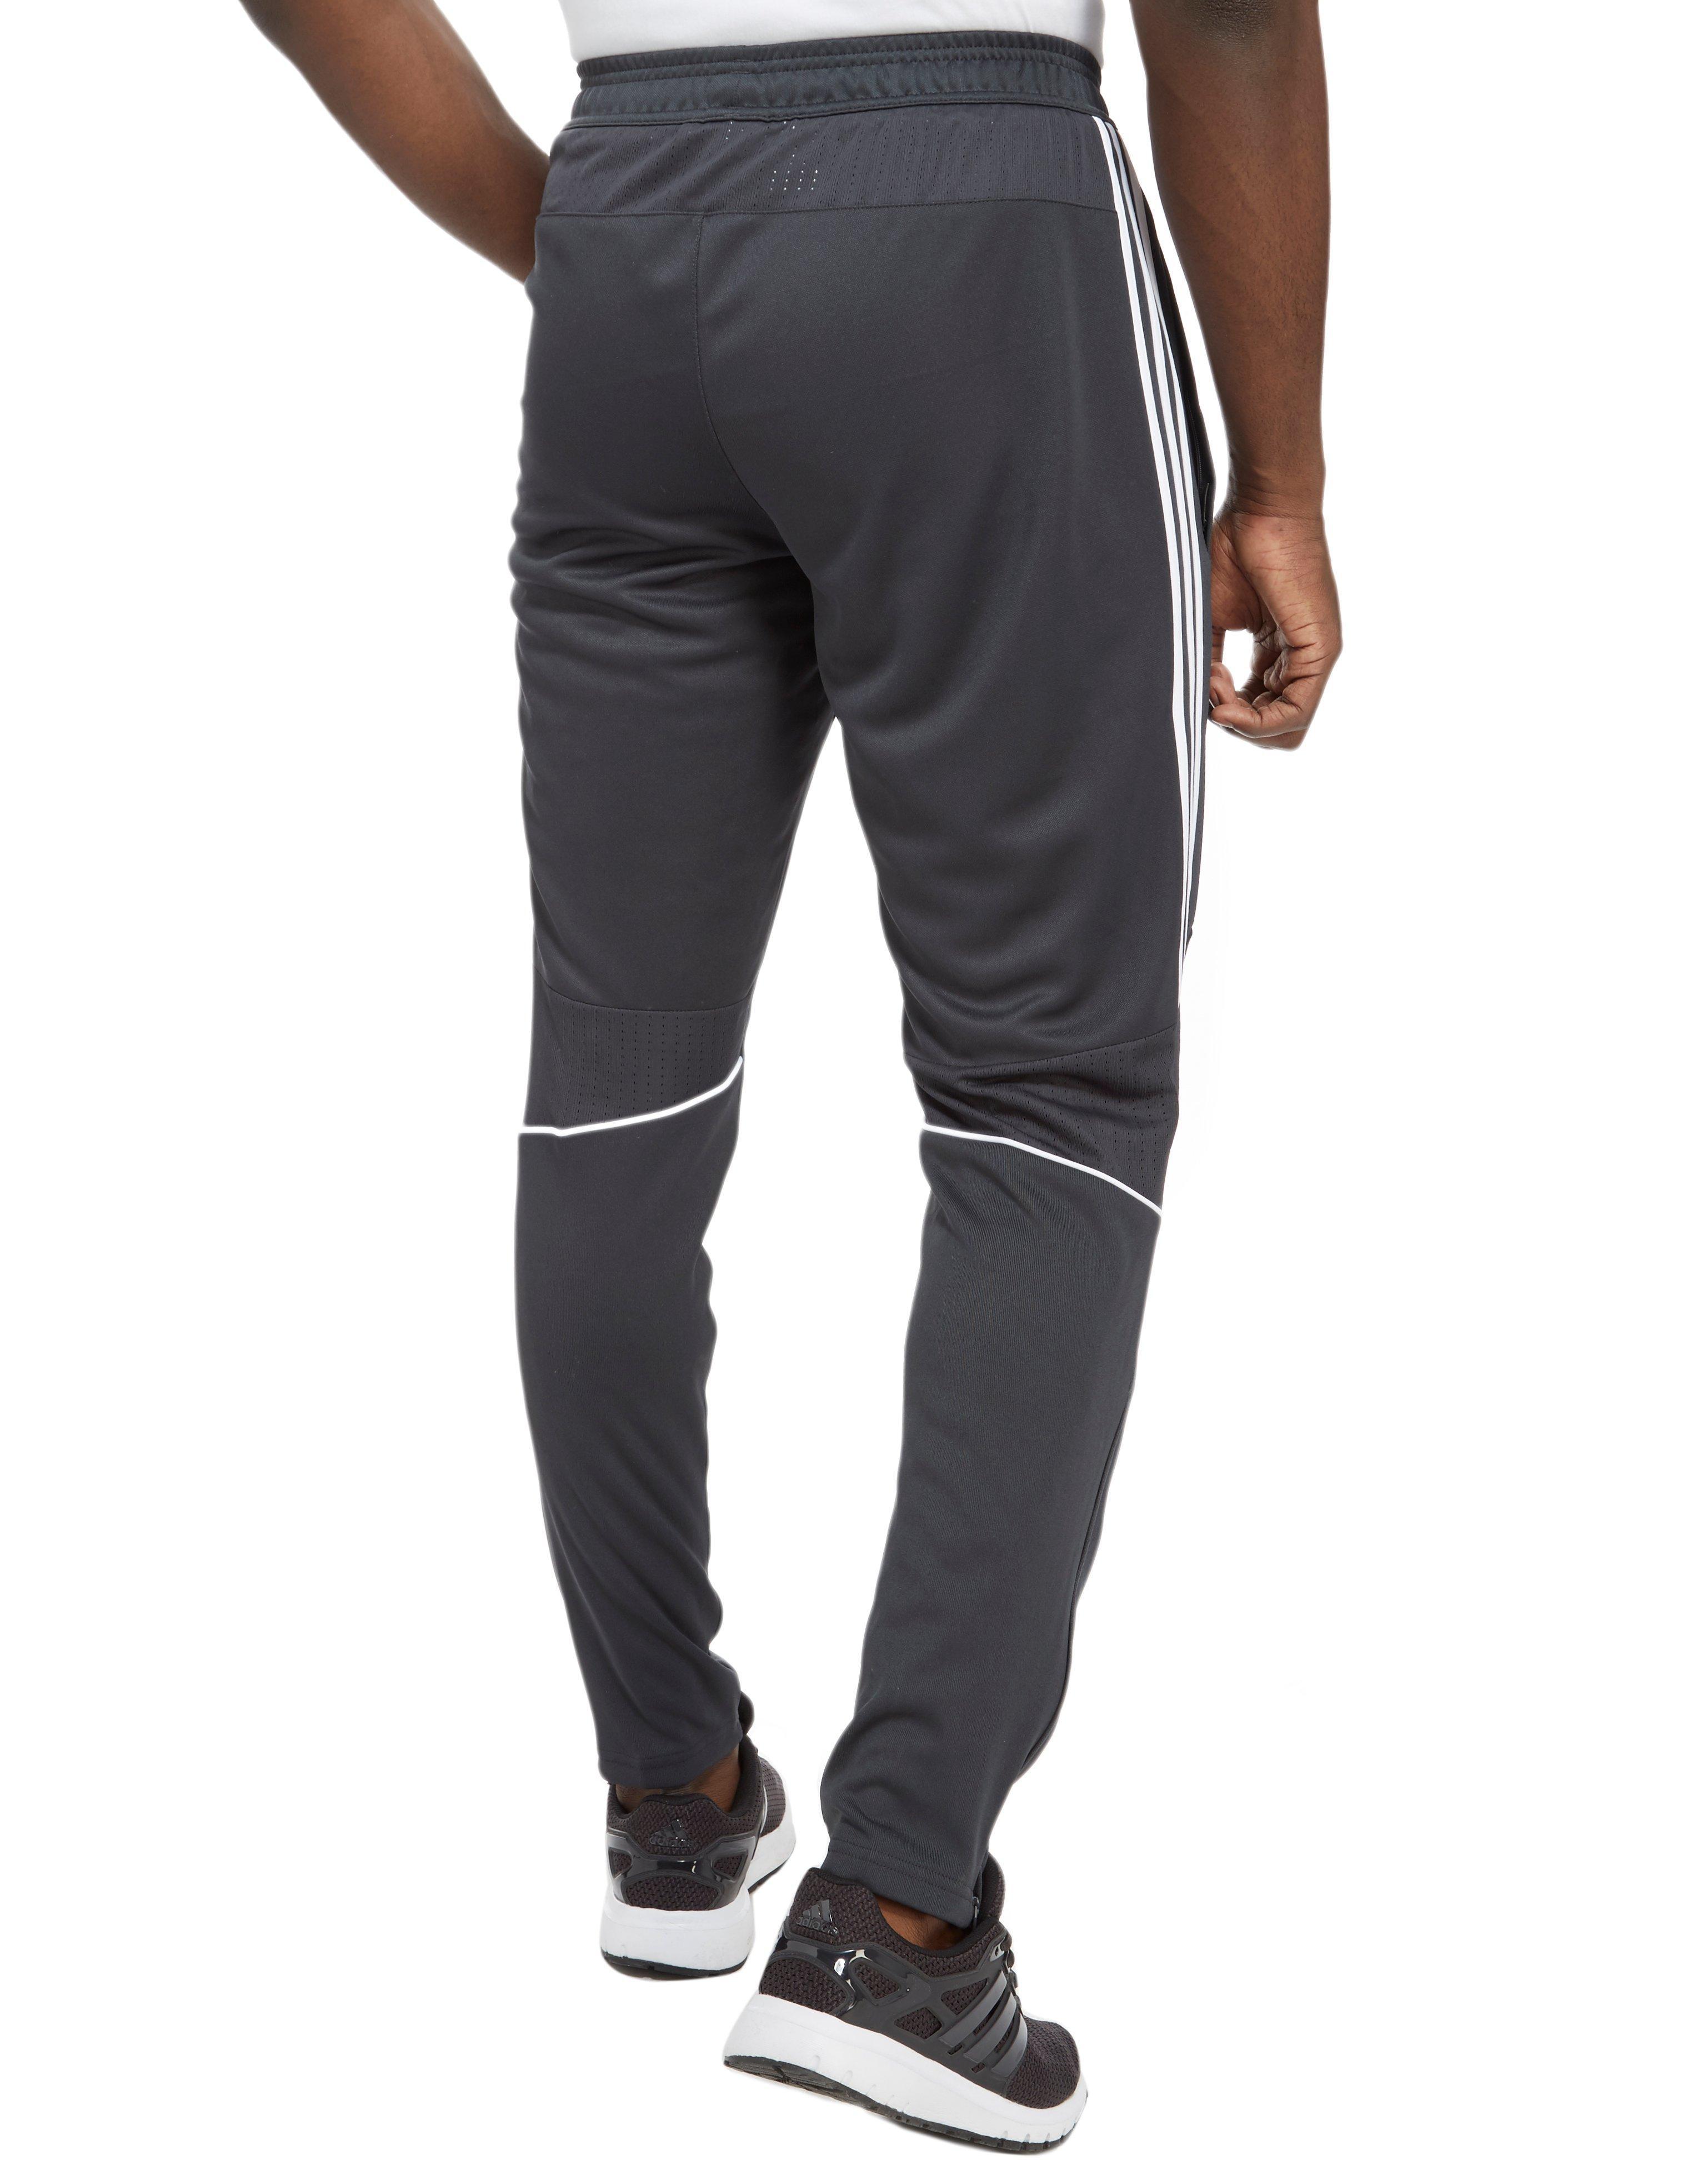 adidas grey pants Online Shopping for 